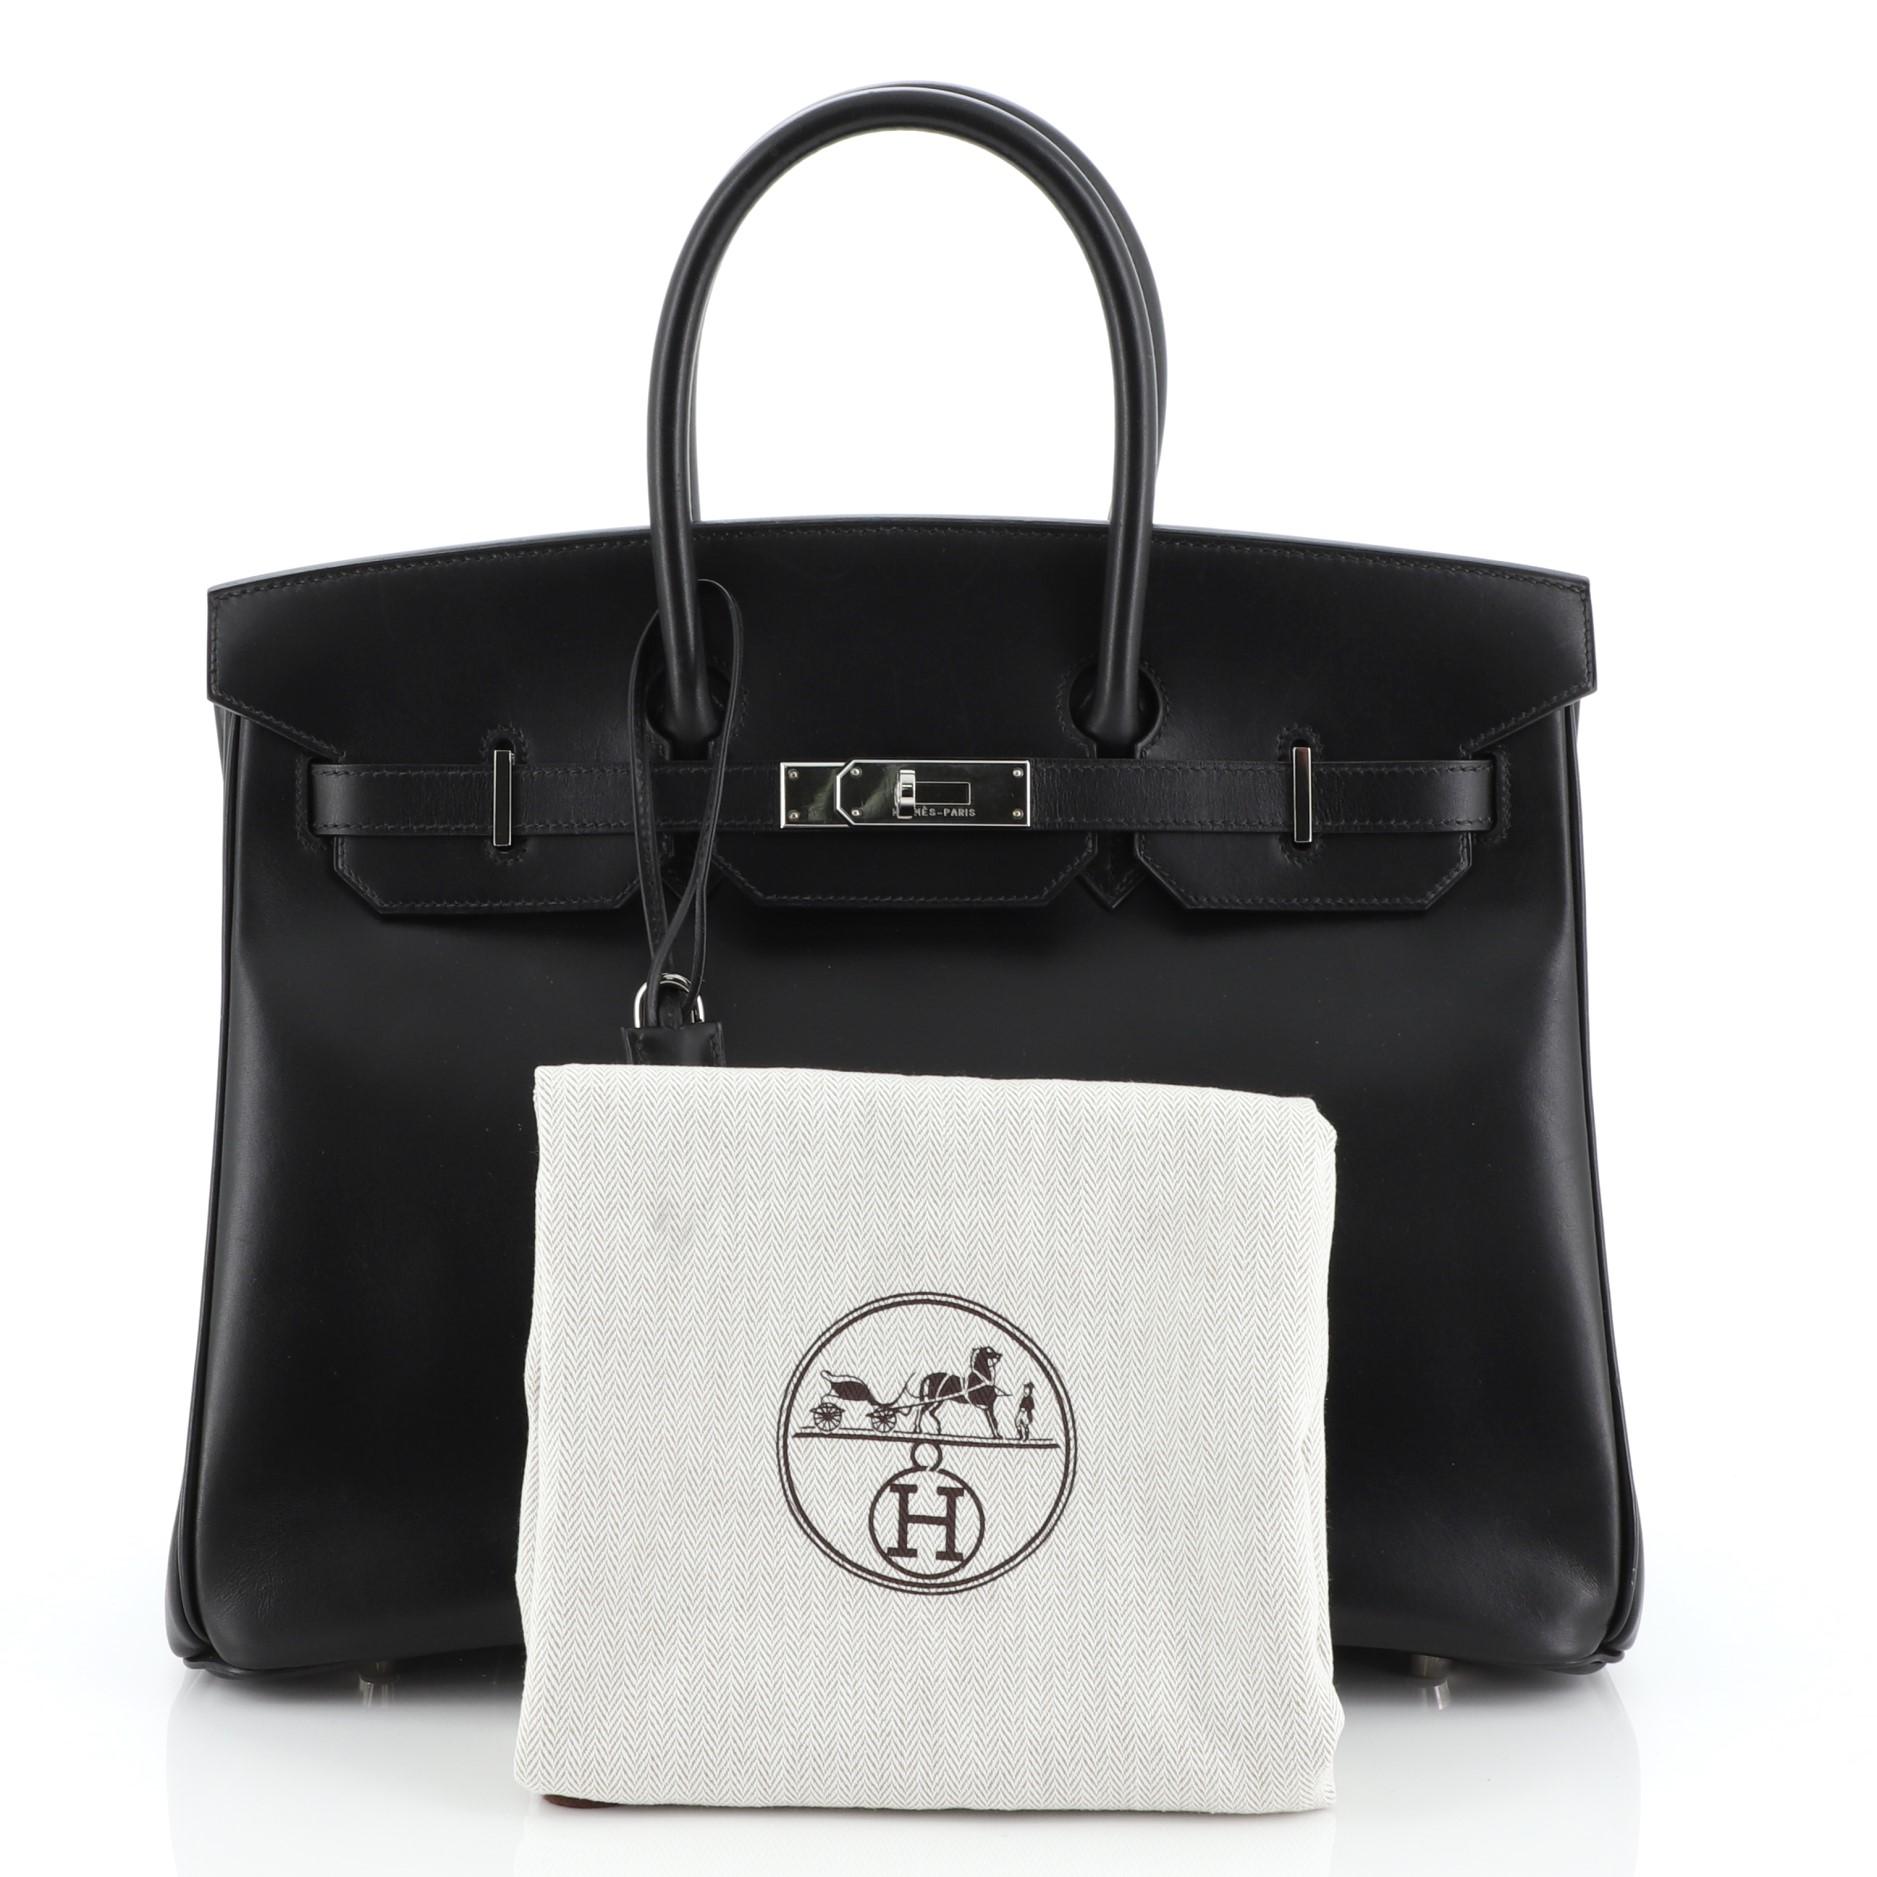 This Hermes Birkin Handbag Noir Box Calf with Palladium Hardware 35, crafted in Noir black Box Calf leather, features dual rolled handles, frontal flap, and palladium hardware. Its turn-lock closure opens to a Noir black Chevre leather interior with